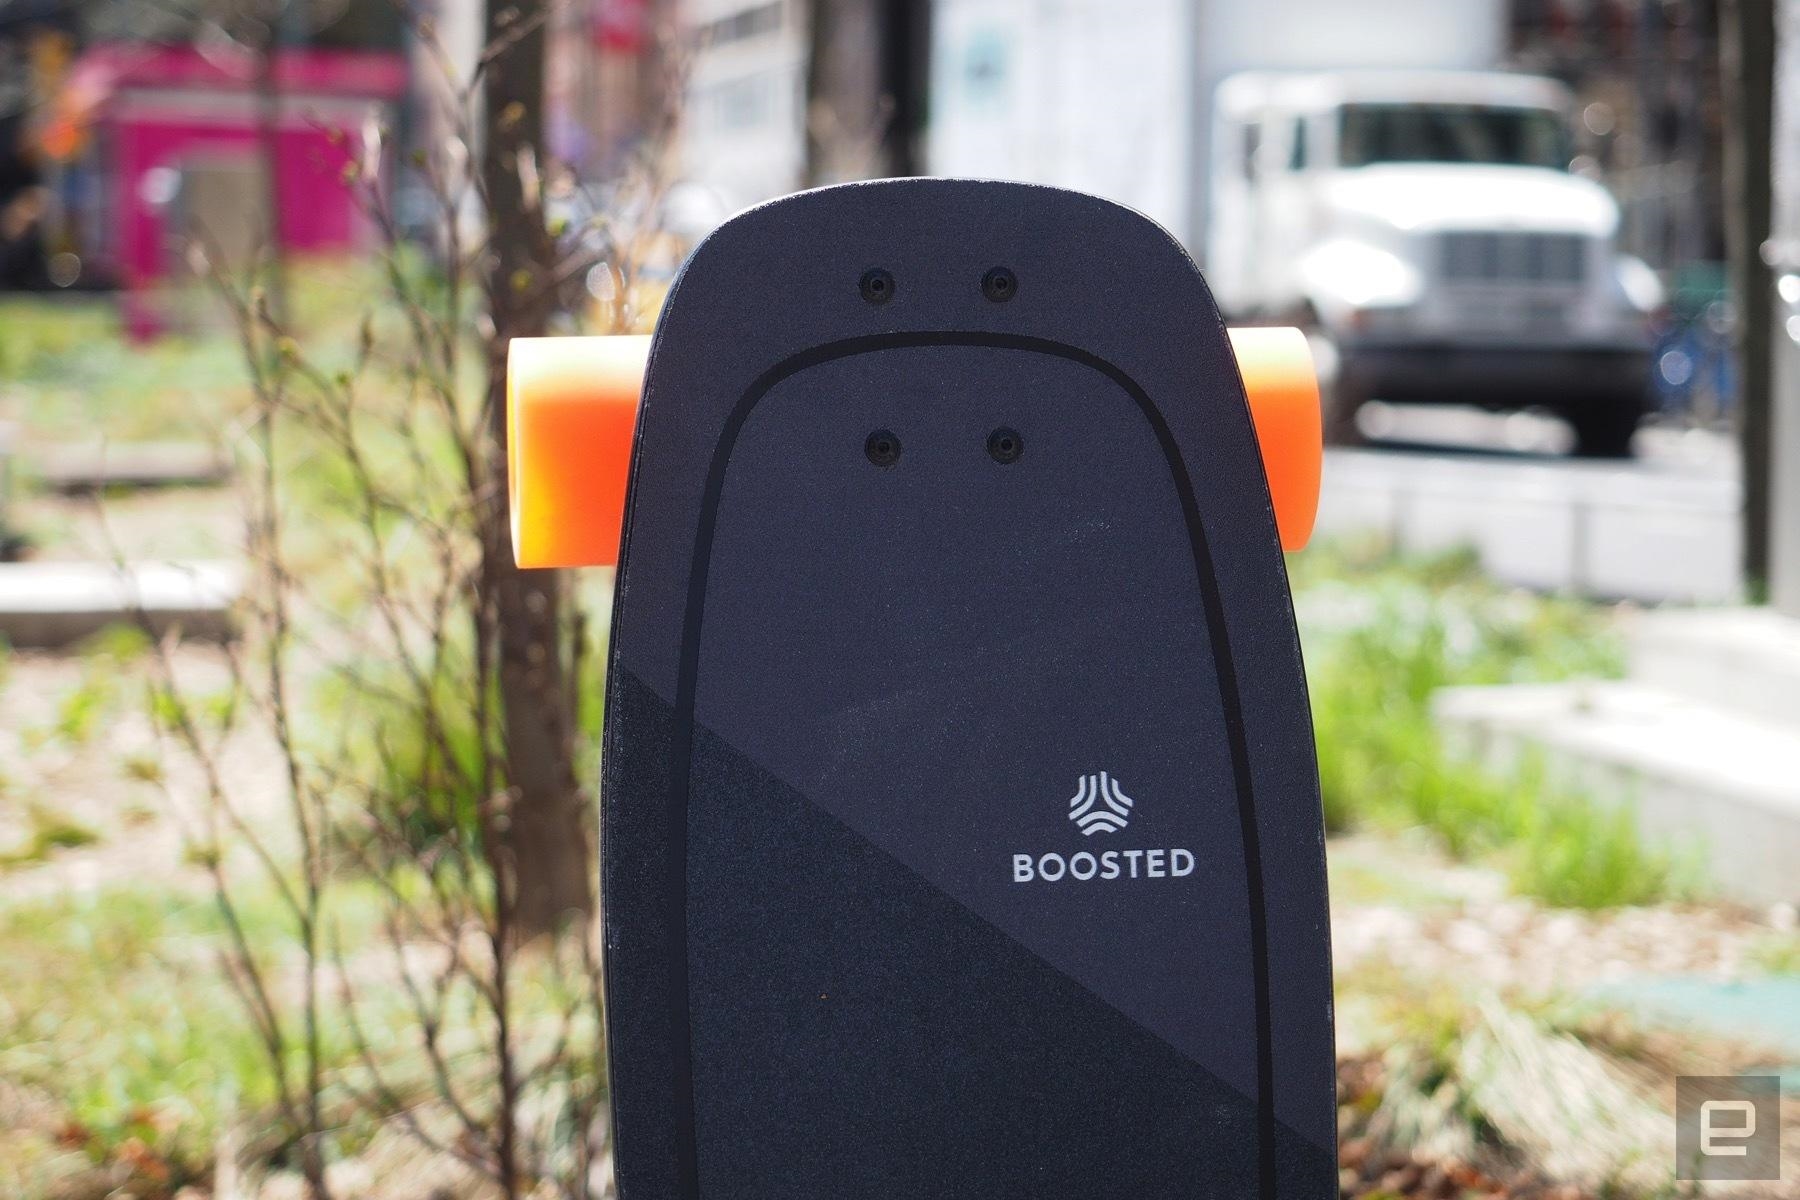 Boosted's planned products included e-bikes and an 'Ultimate' skateboard | DeviceDaily.com